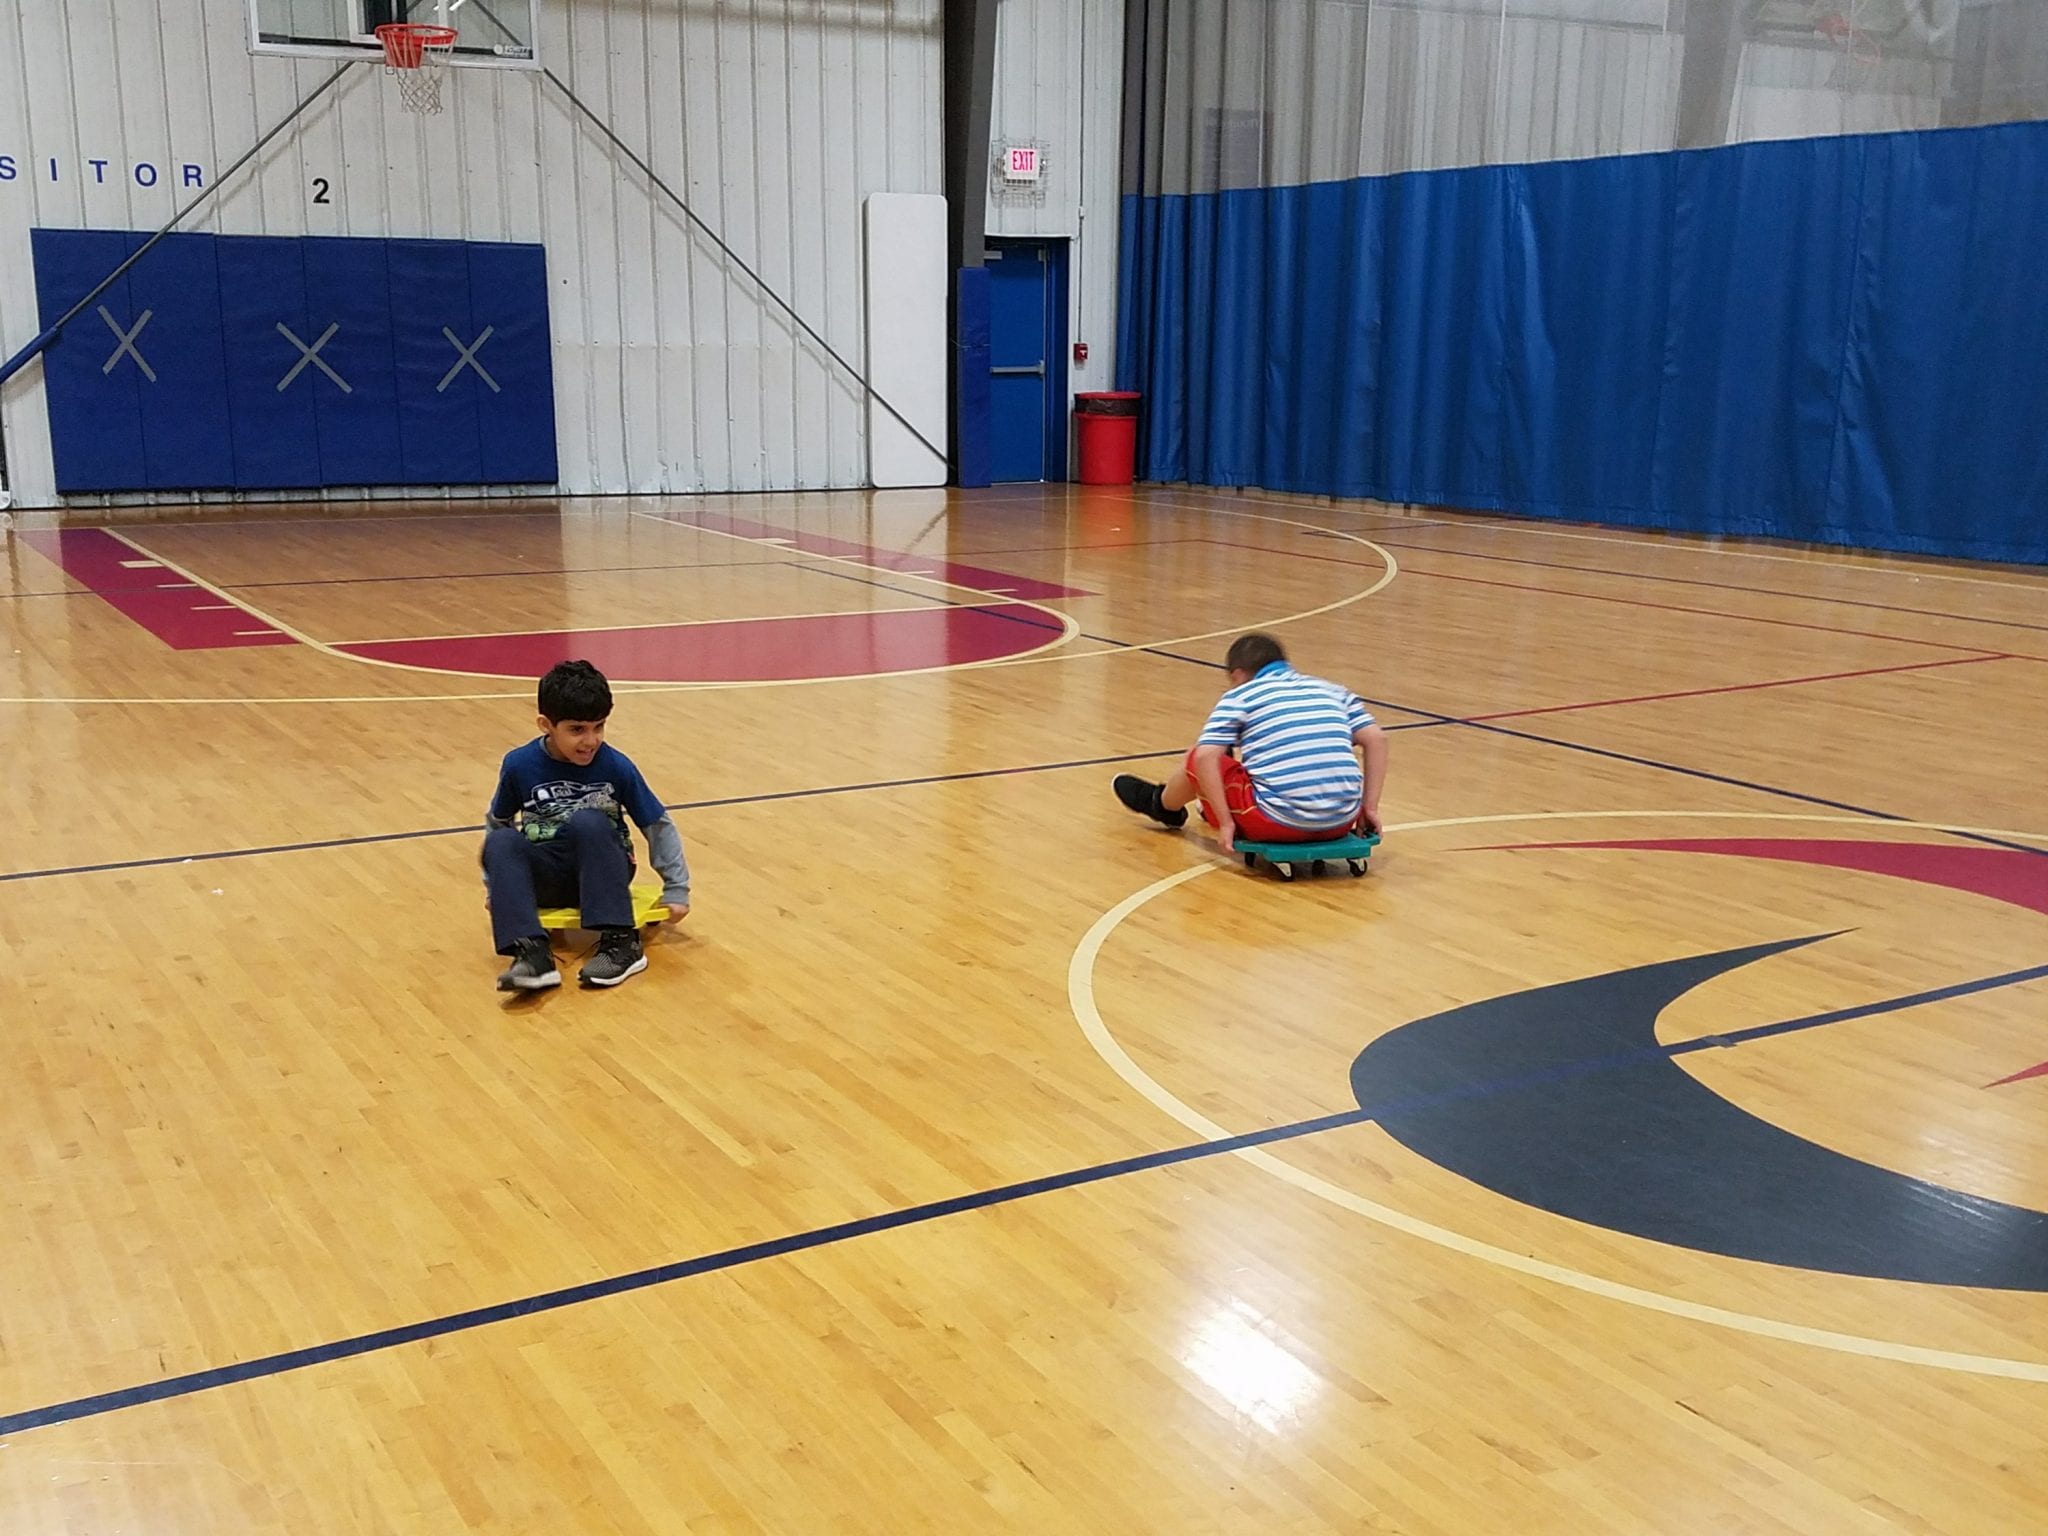 Students rolling around the gym